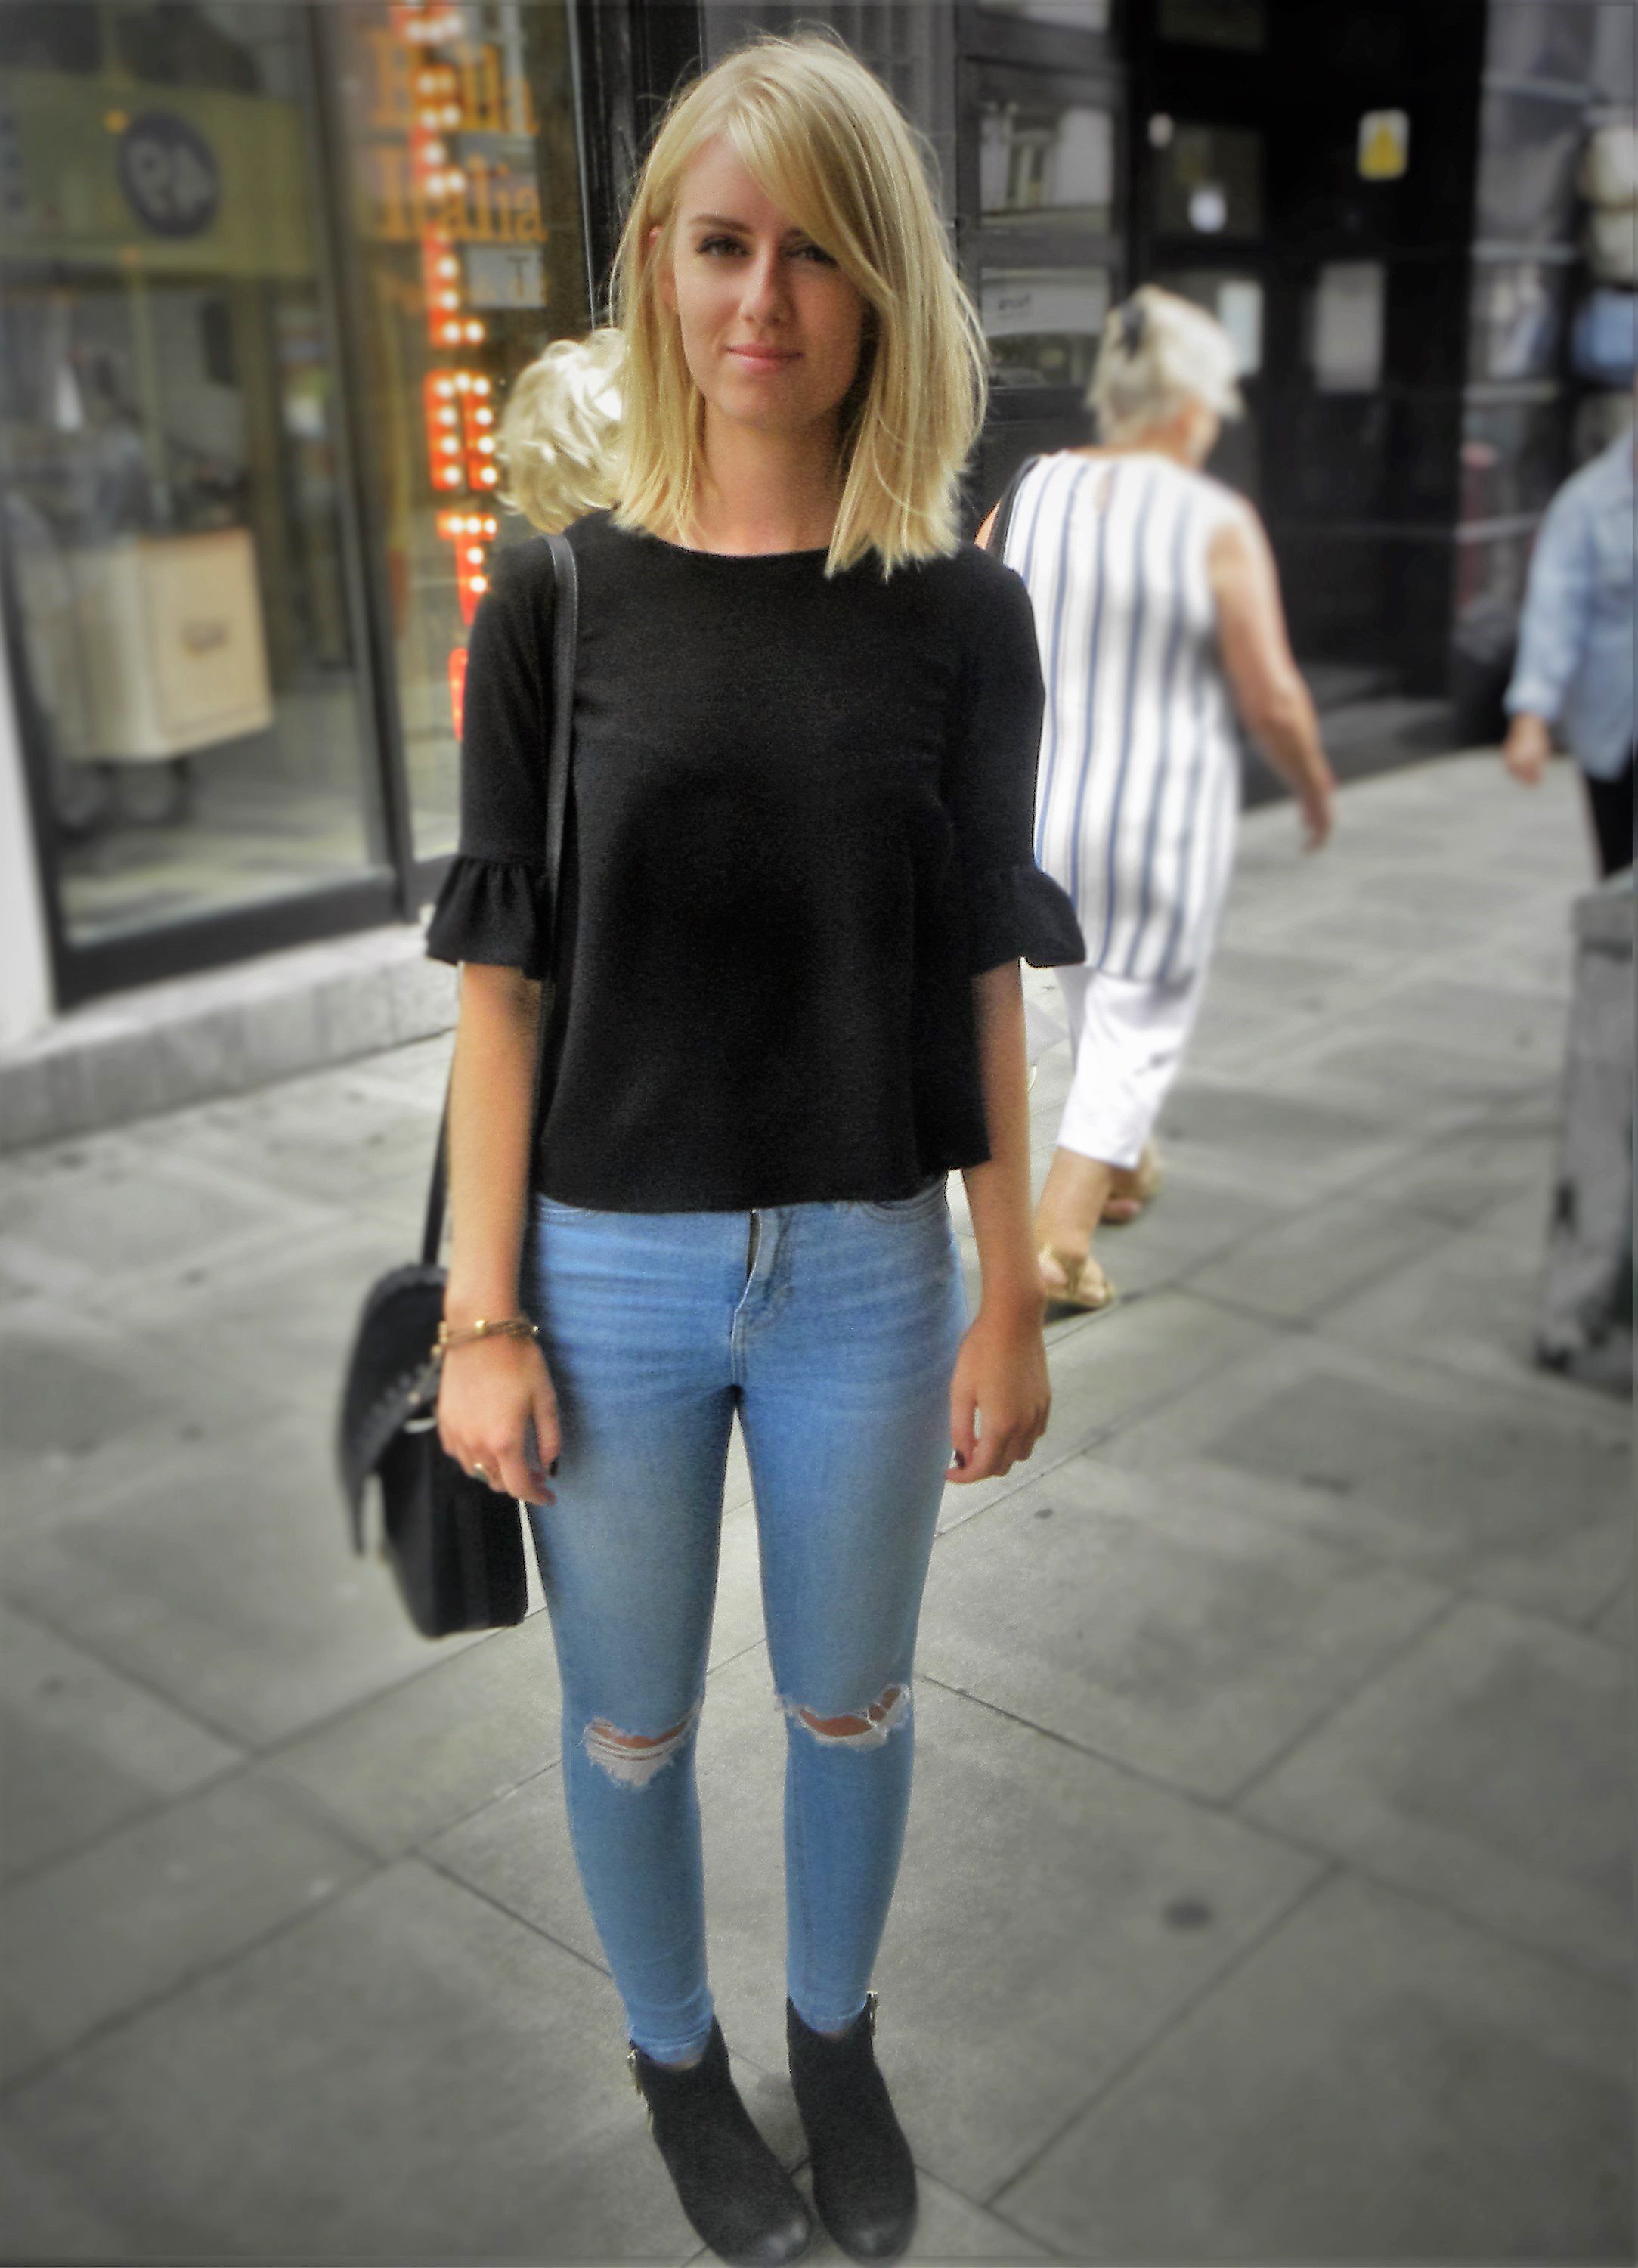 Amy is wearing a top from Miss Selfridge, jeans from Top Shop, shoes from Aldo and bag Ossis.